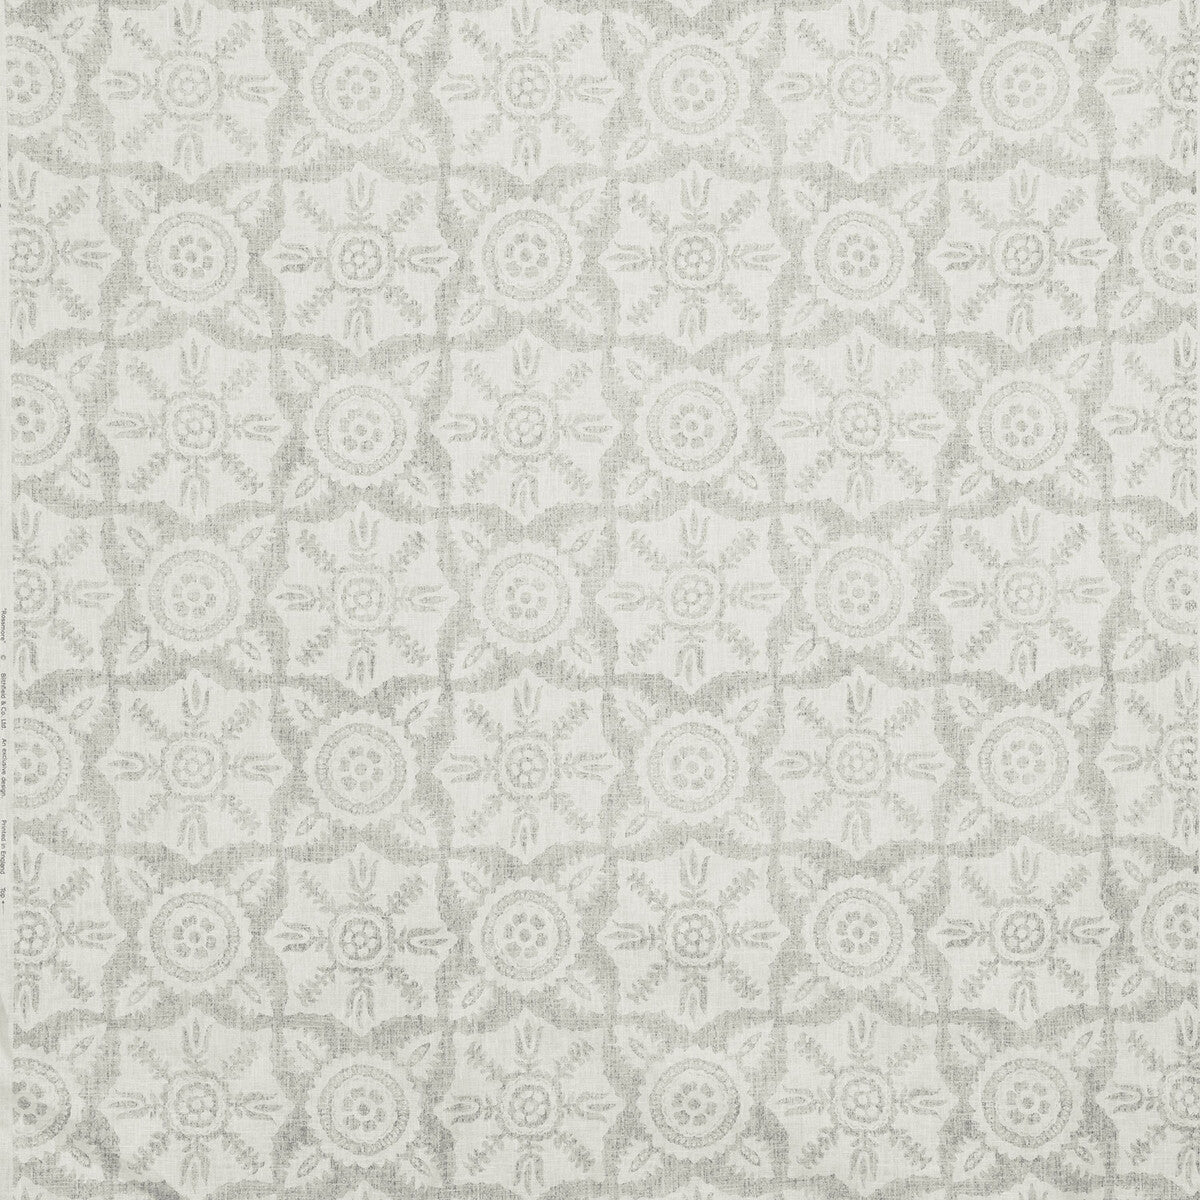 Rossmore II fabric in grey color - pattern BFC-3647.11.0 - by Lee Jofa in the Blithfield collection